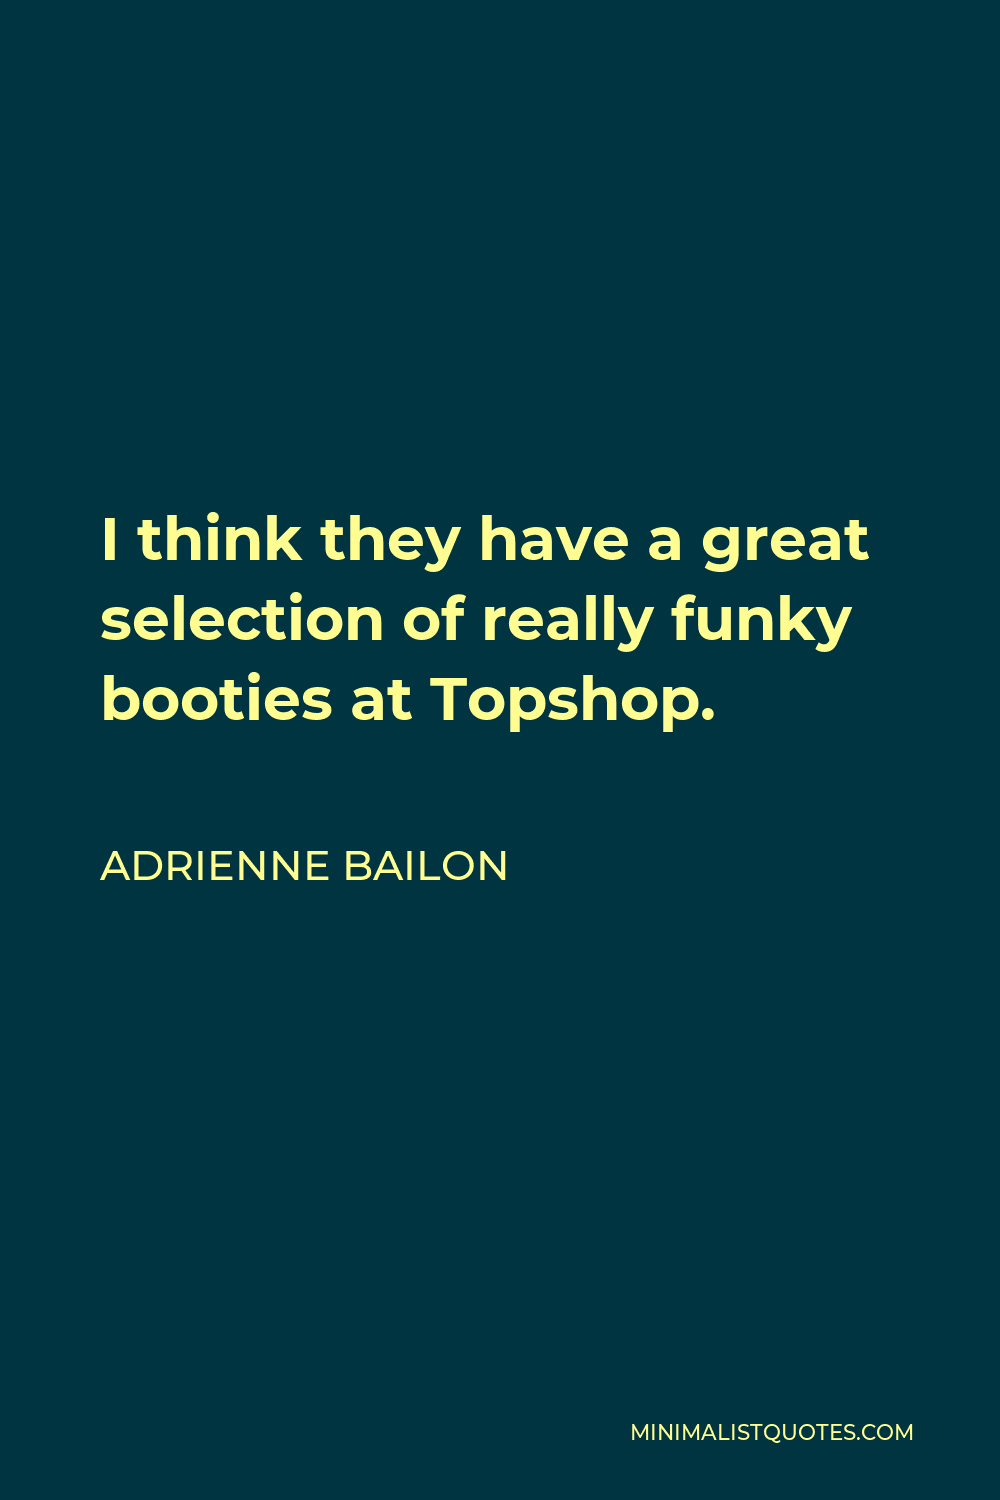 Adrienne Bailon Quote - I think they have a great selection of really funky booties at Topshop.